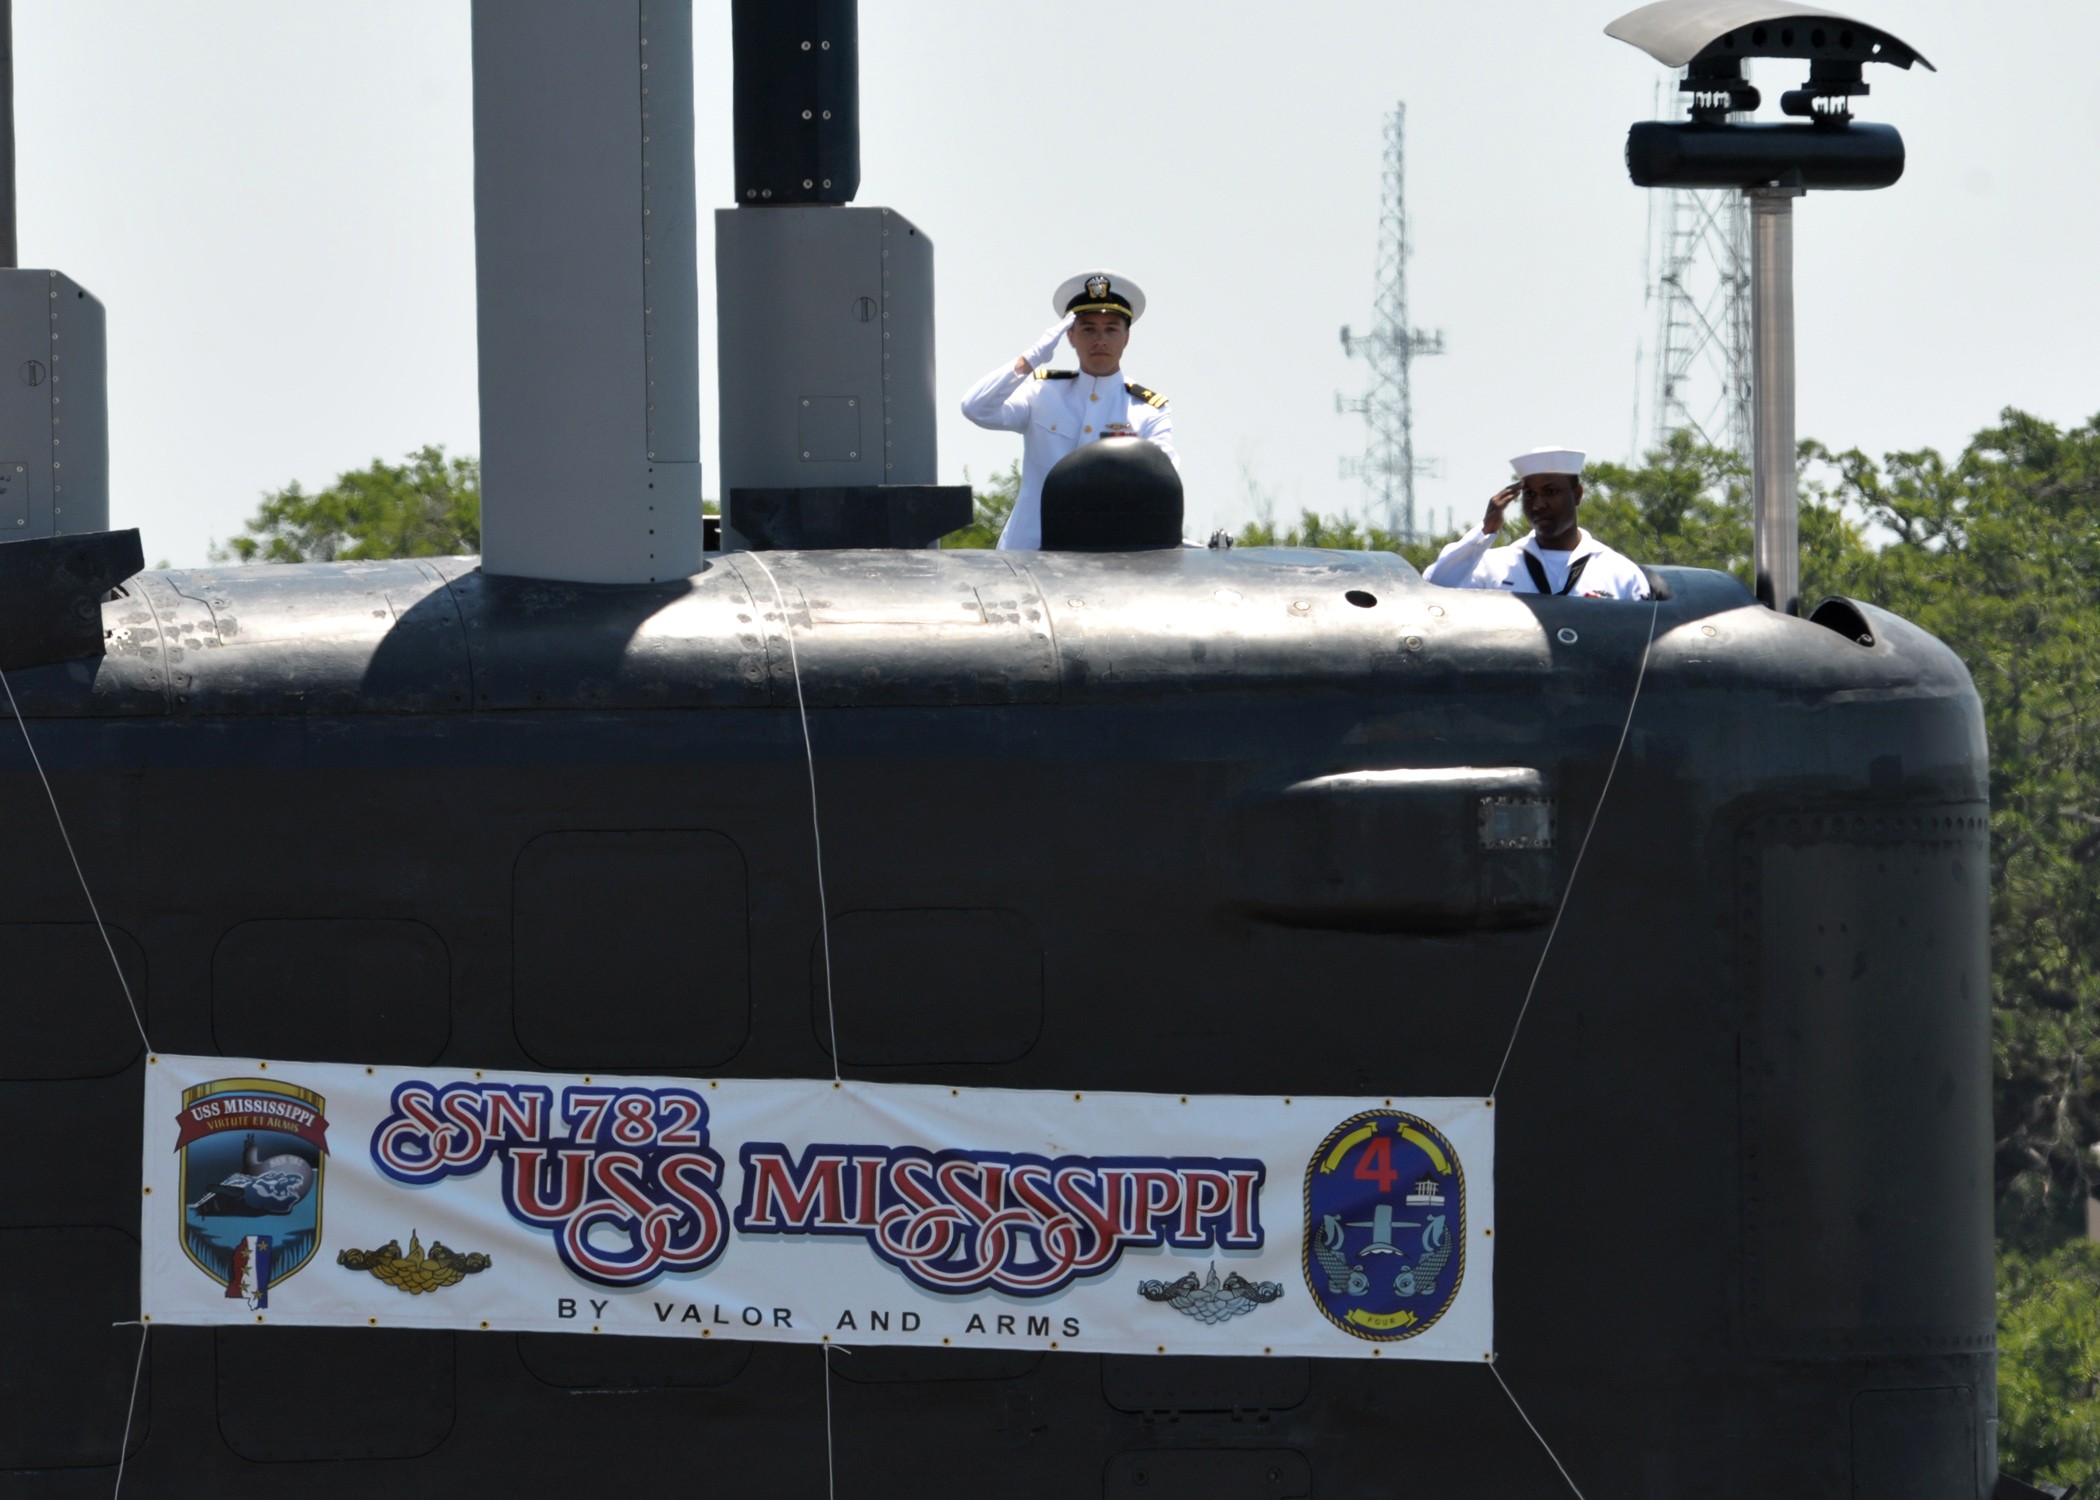 ssn-782 uss mississippi virginia class attack submarine us navy 14 commissioning